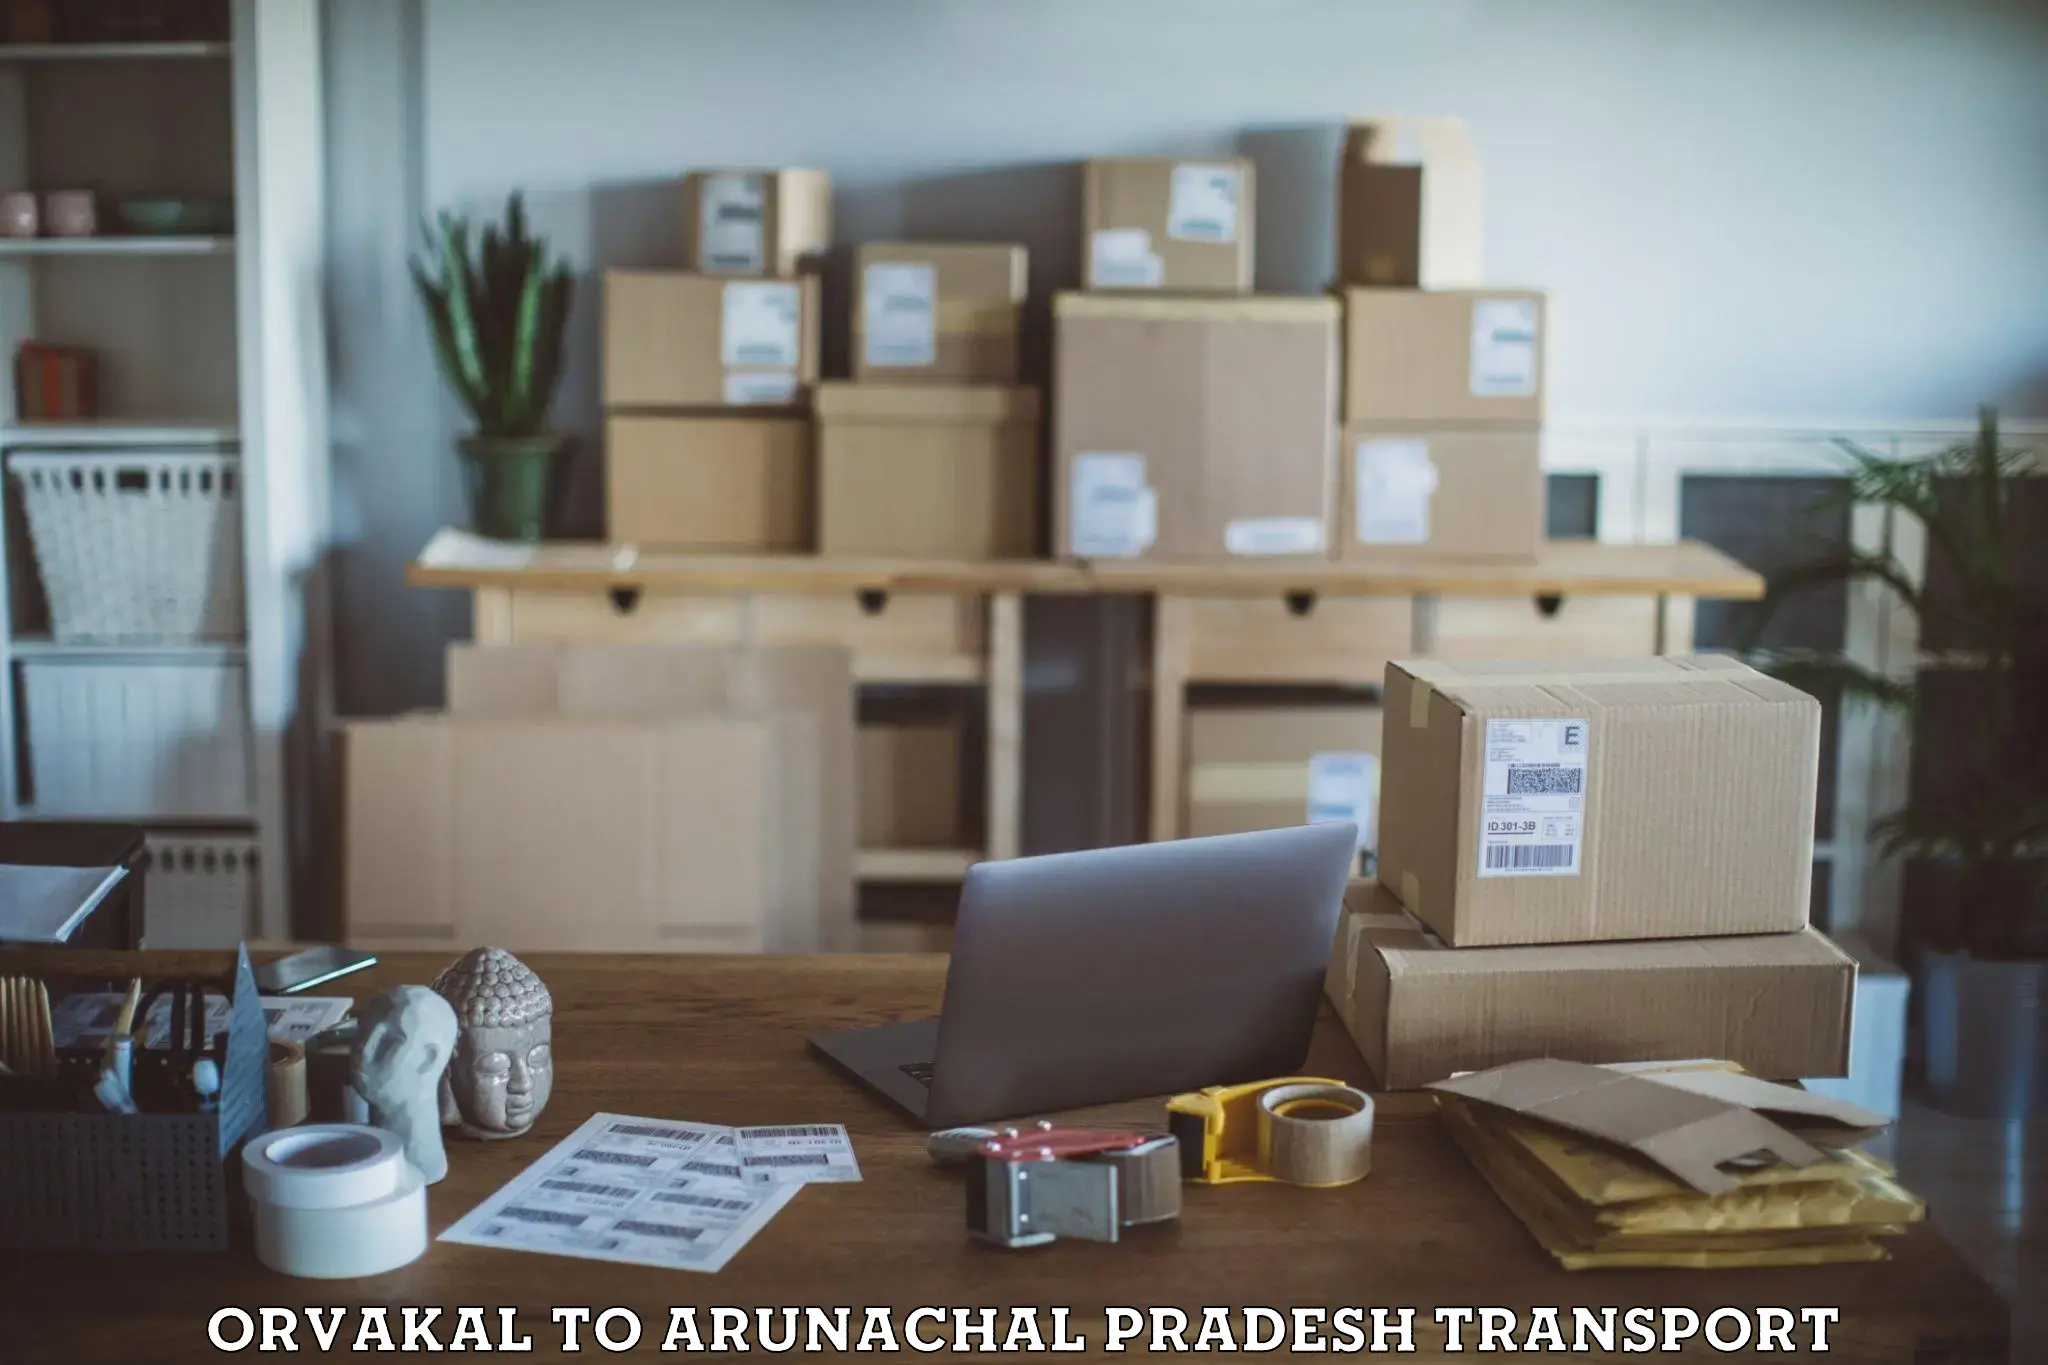 Express transport services Orvakal to Tezu